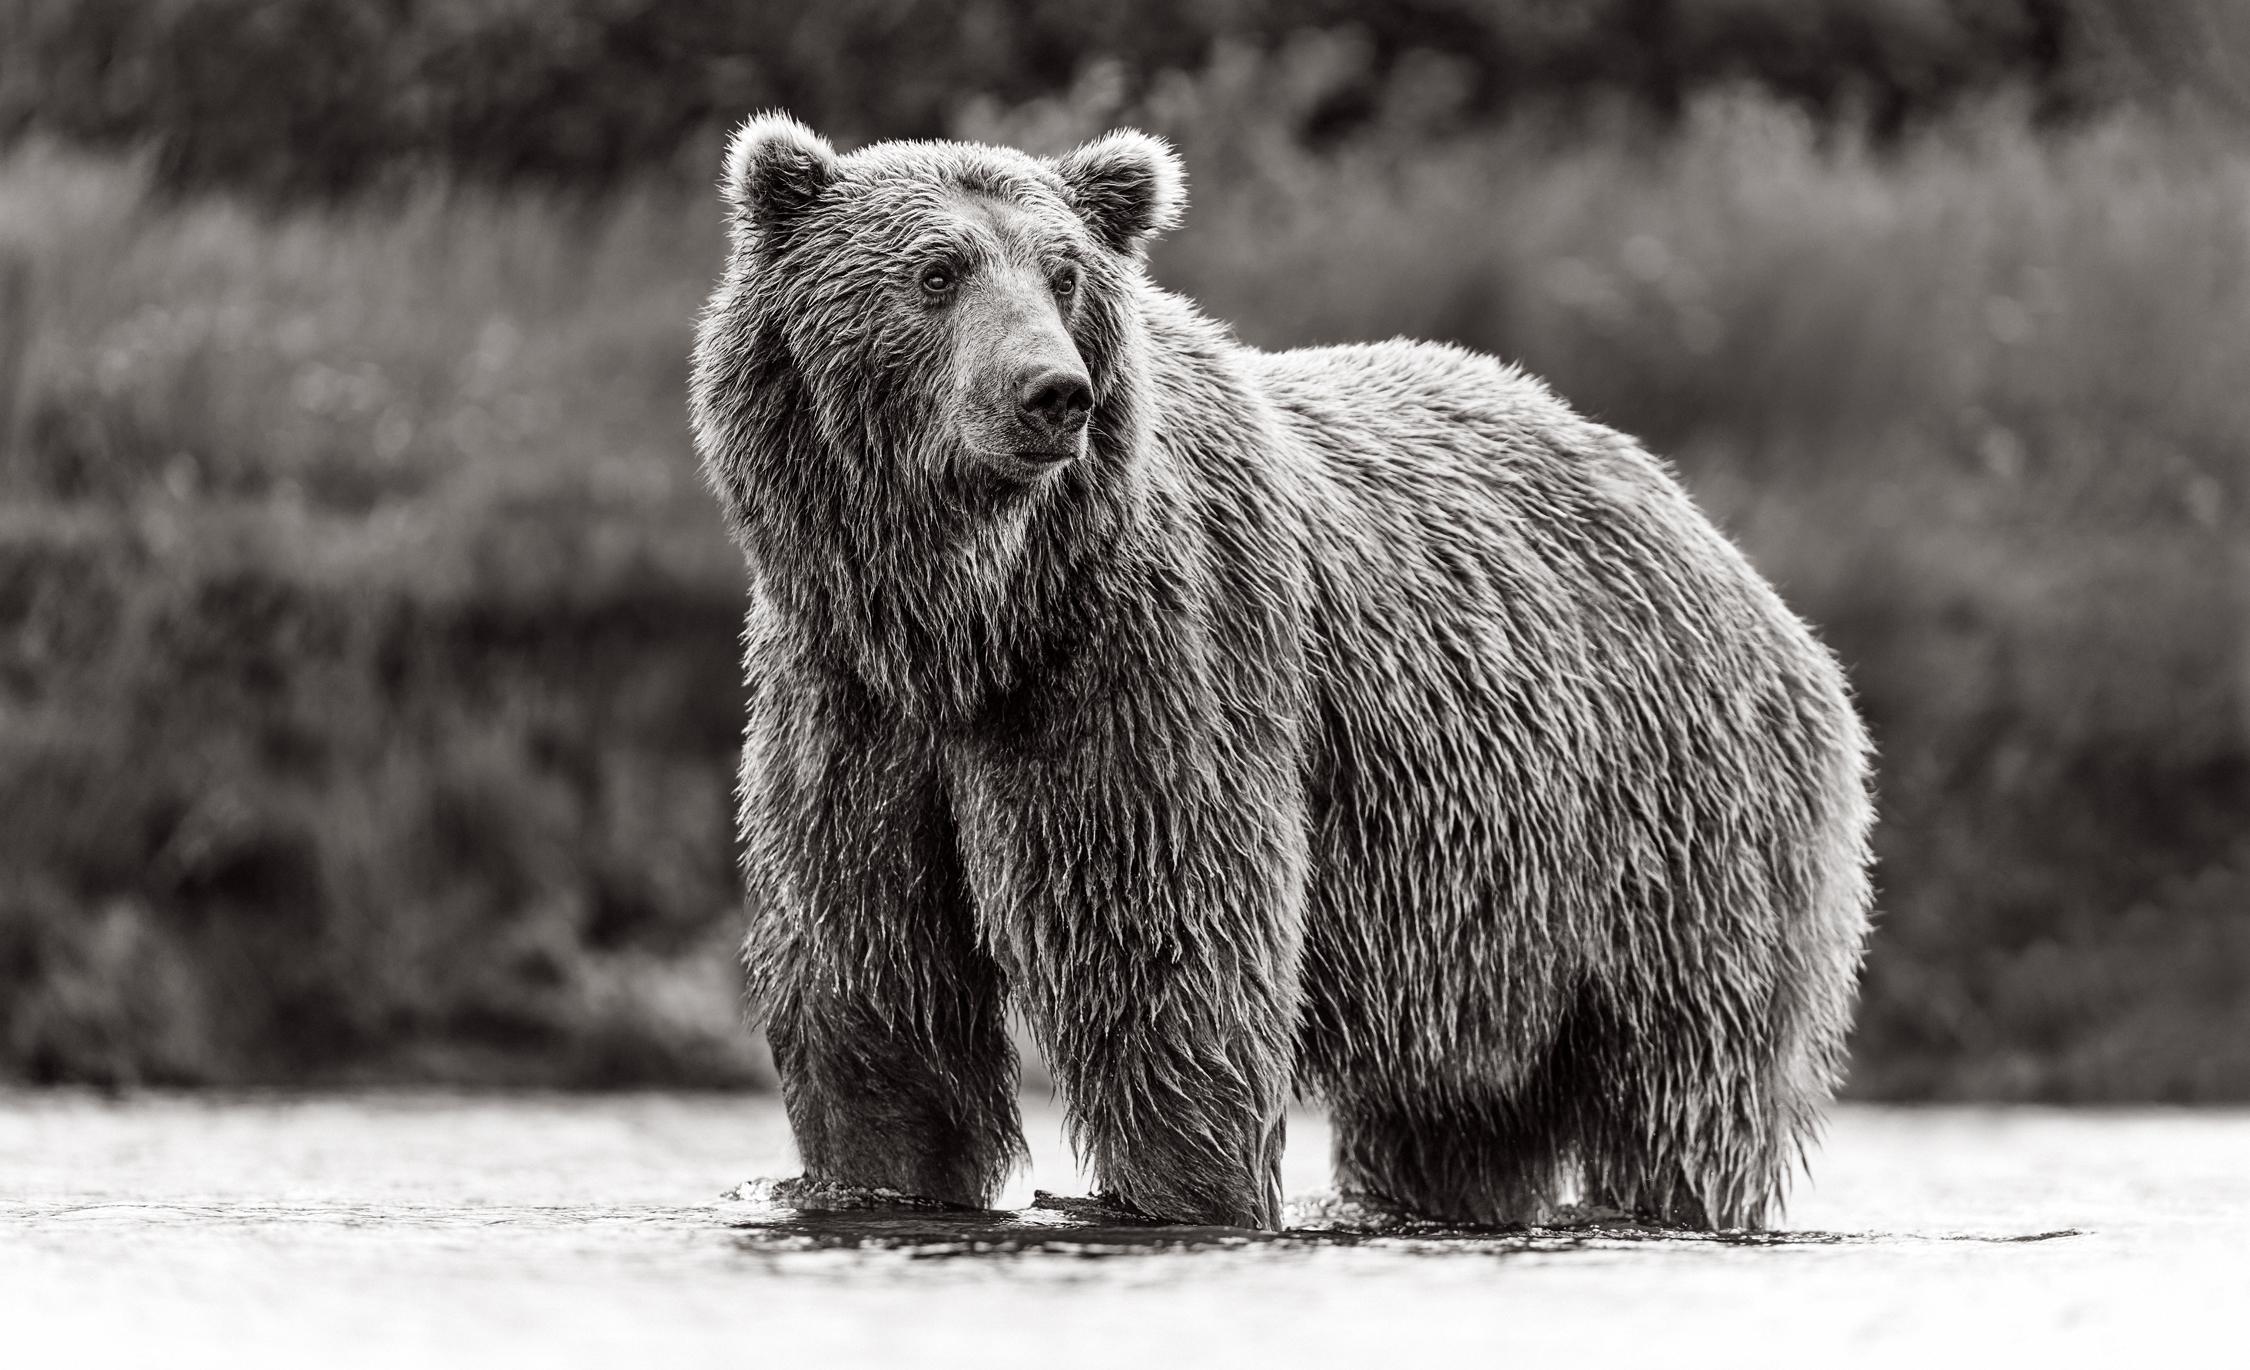 Black & white portrait of a brown bear in the creek against dense foliage